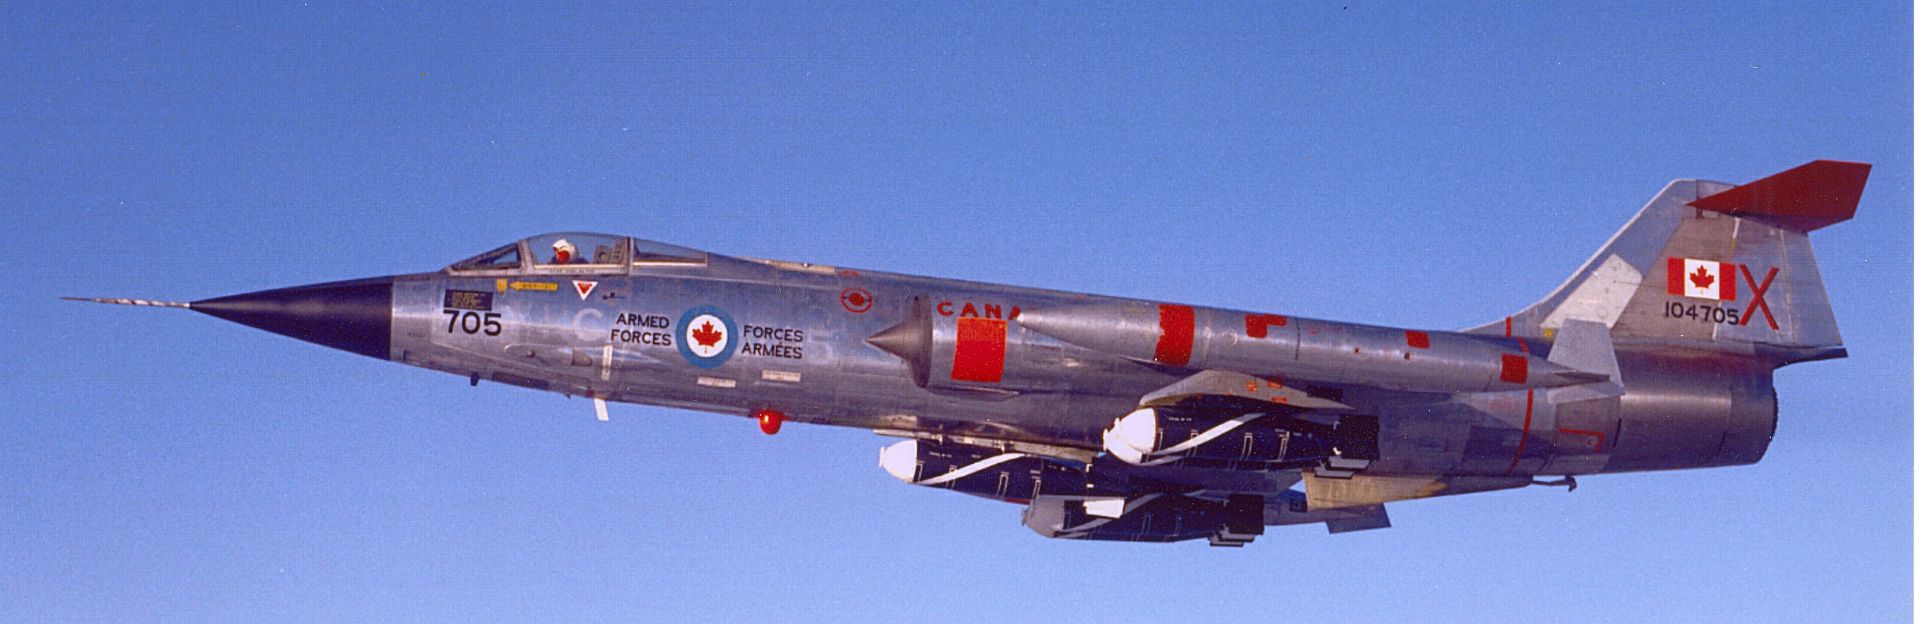 CF 104 Starfighter From The Aerospace Engineering Test Establishment Carrying A Full Load Of BL 755 Cluster Bombs